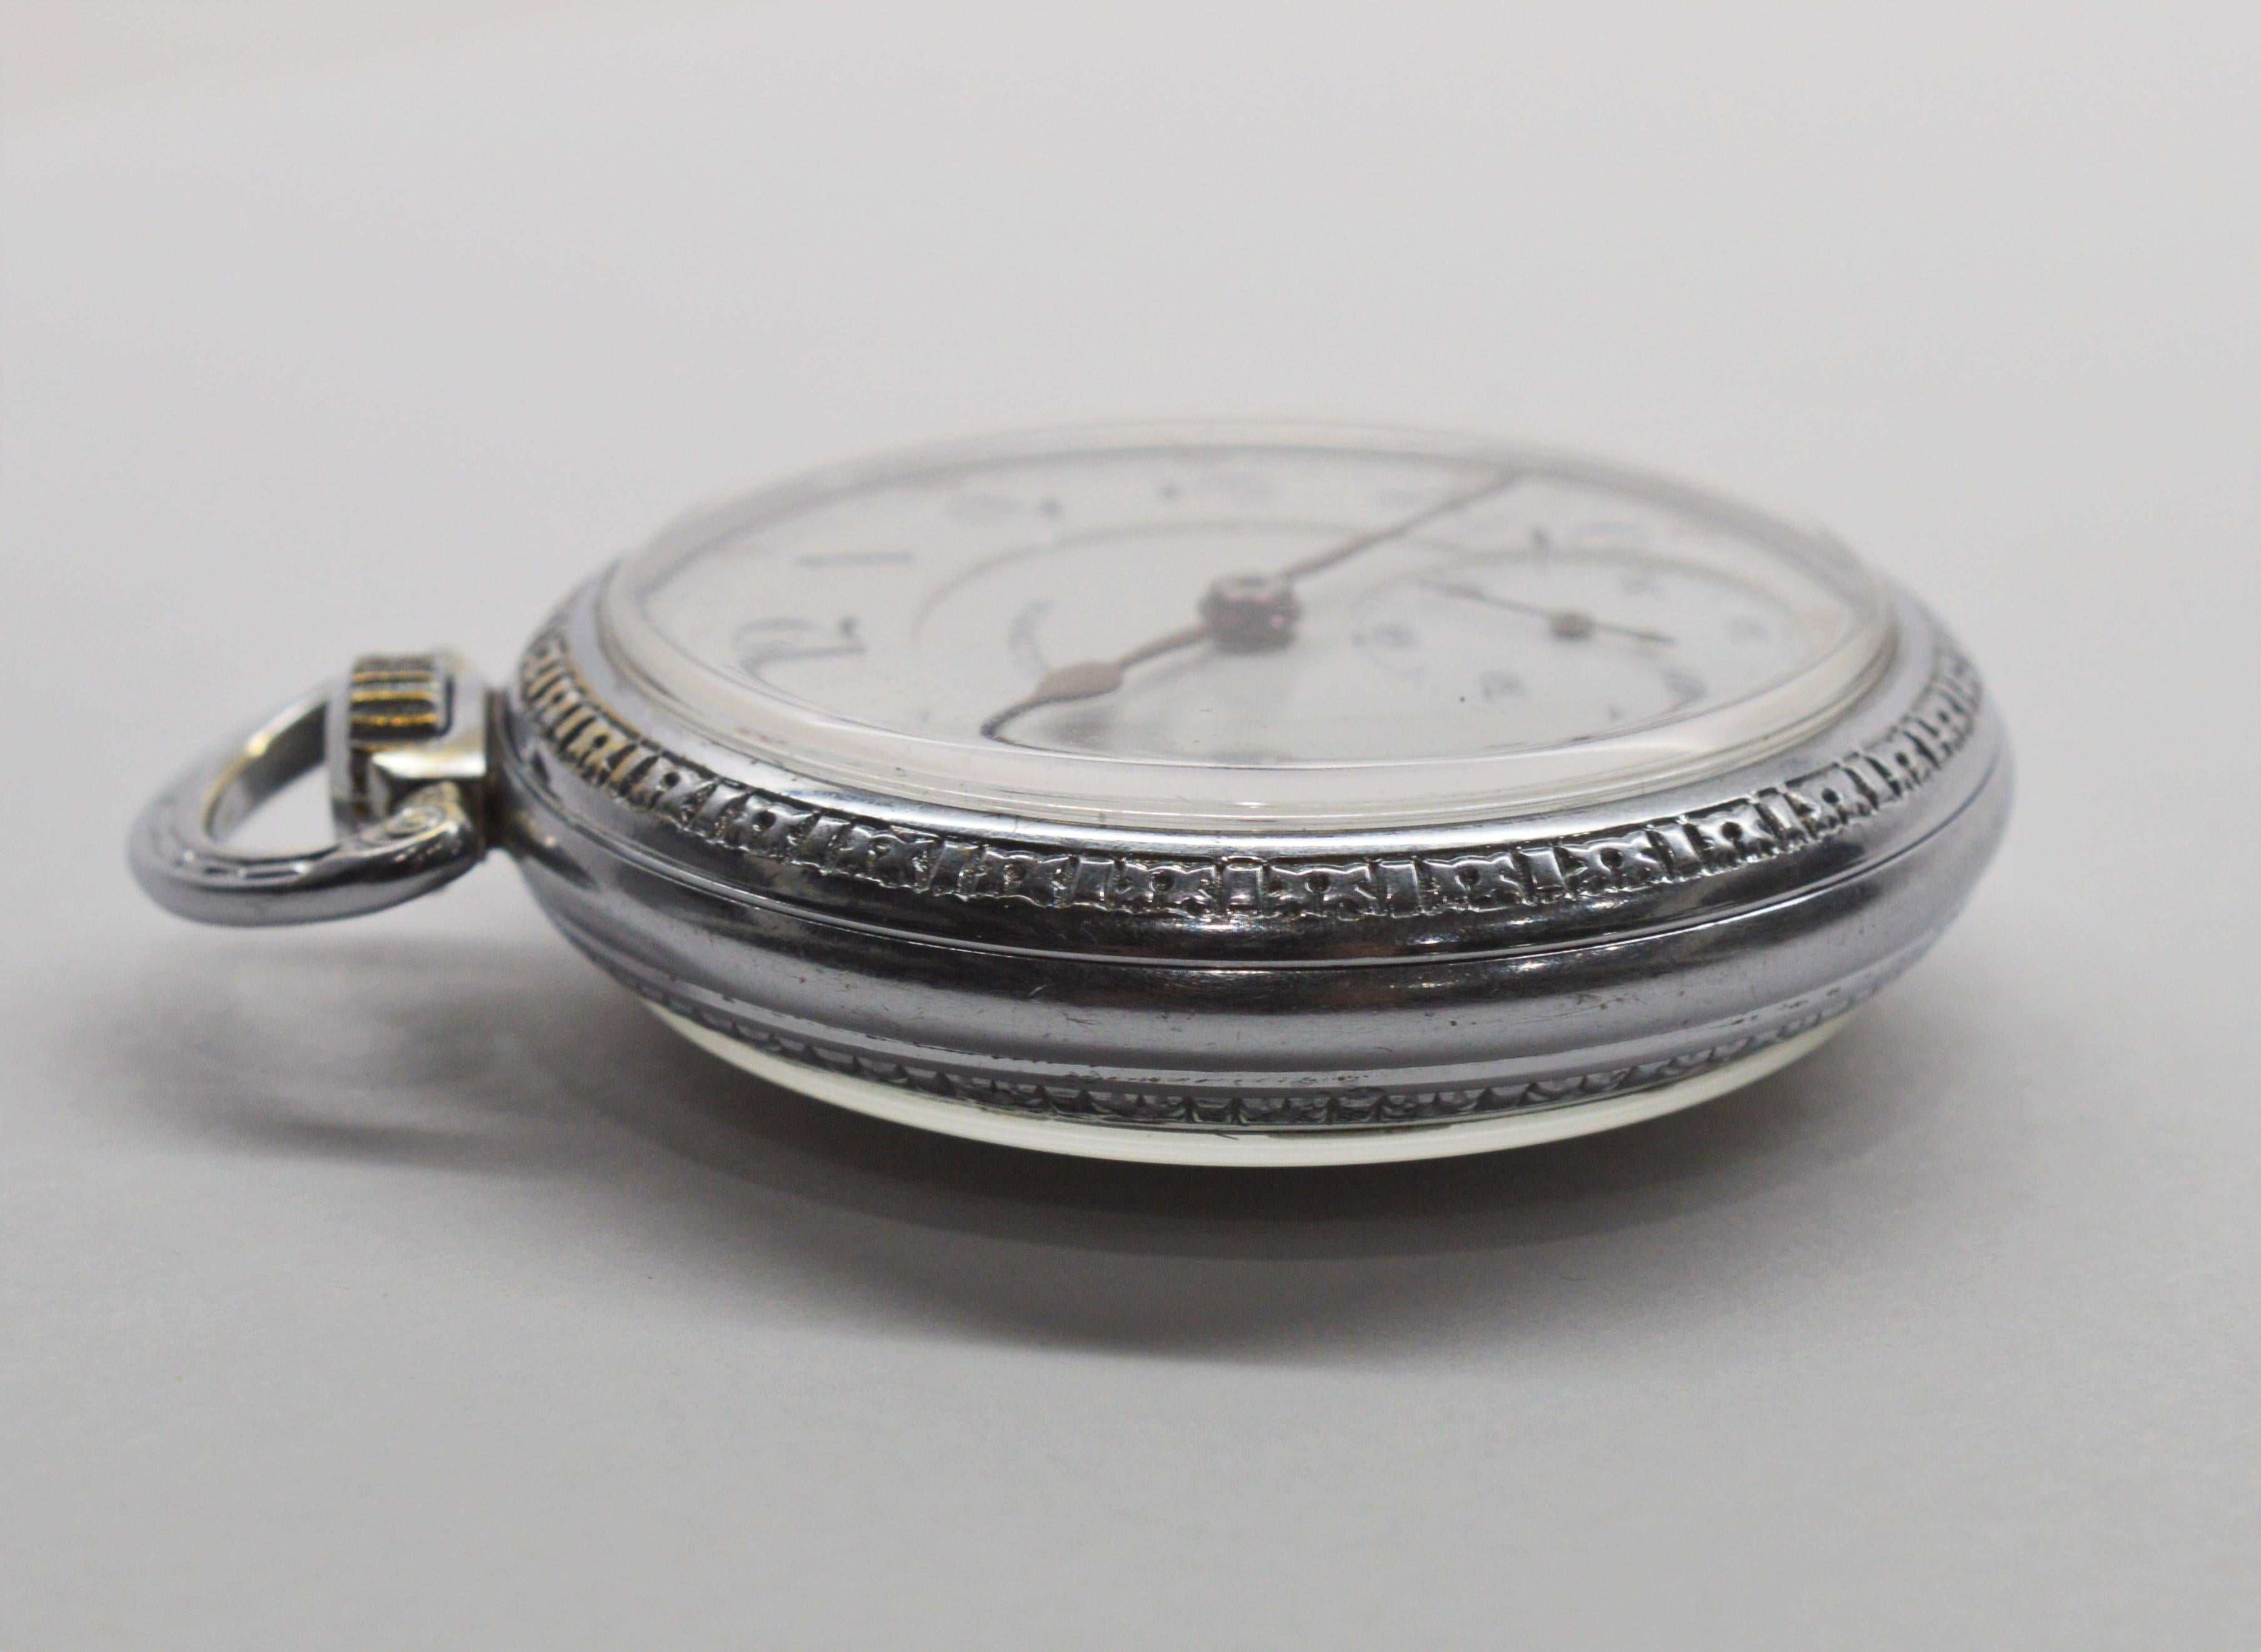 Illinois Steel Pocket Watch with Display Back 4